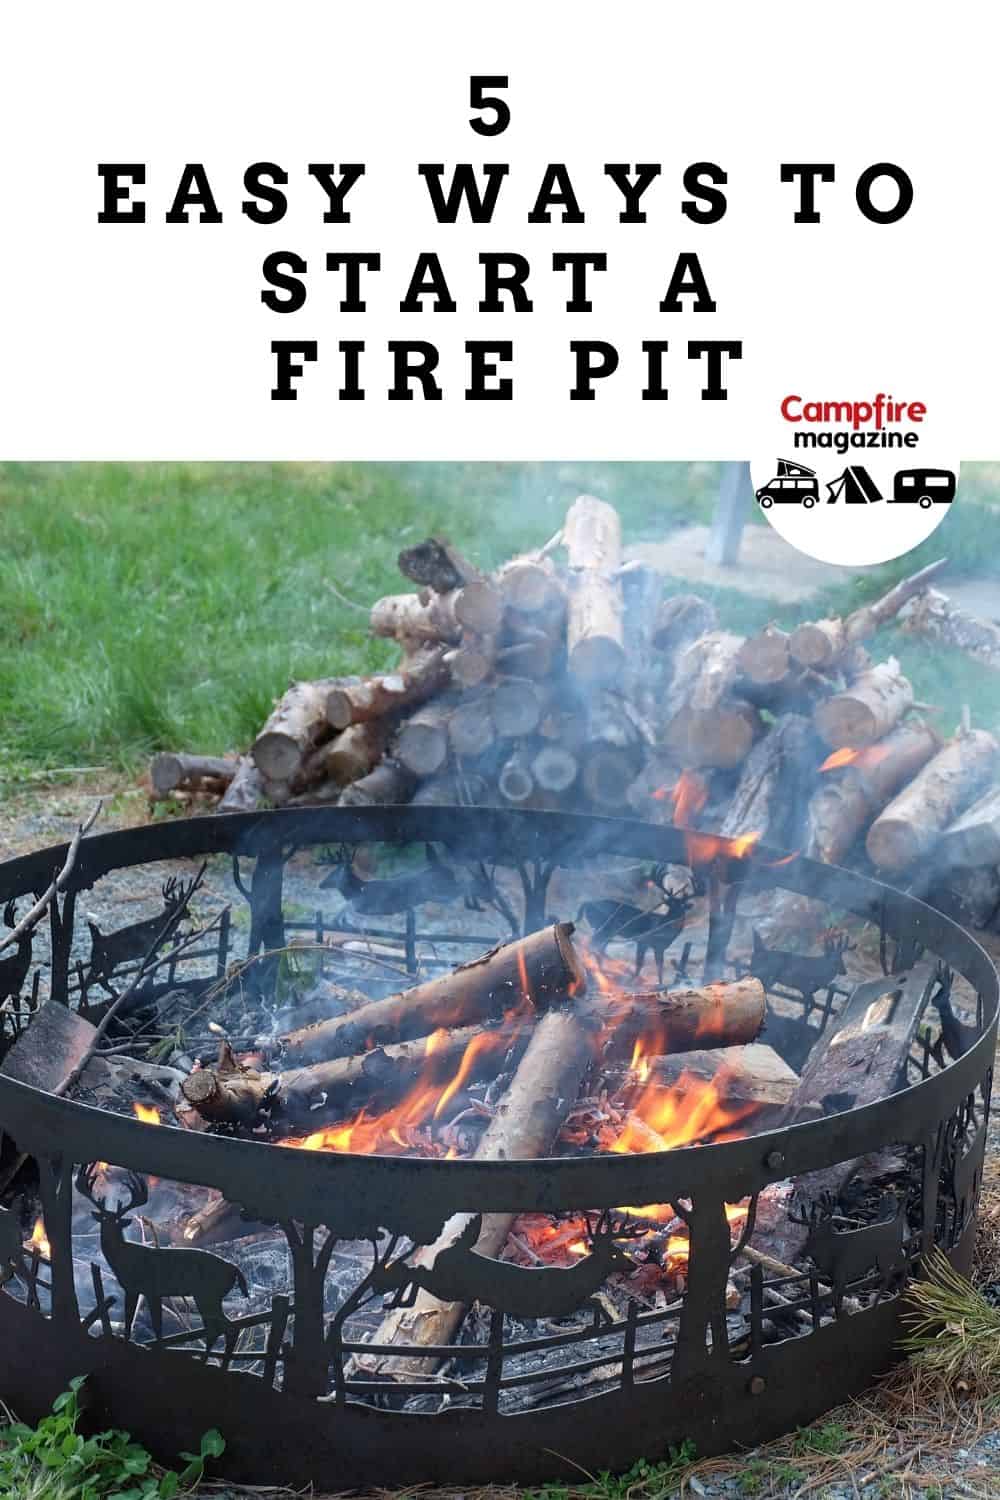 5 Easy Ways To Start A Fire Pit, Best Way To Start A Fire In A Fire Pit